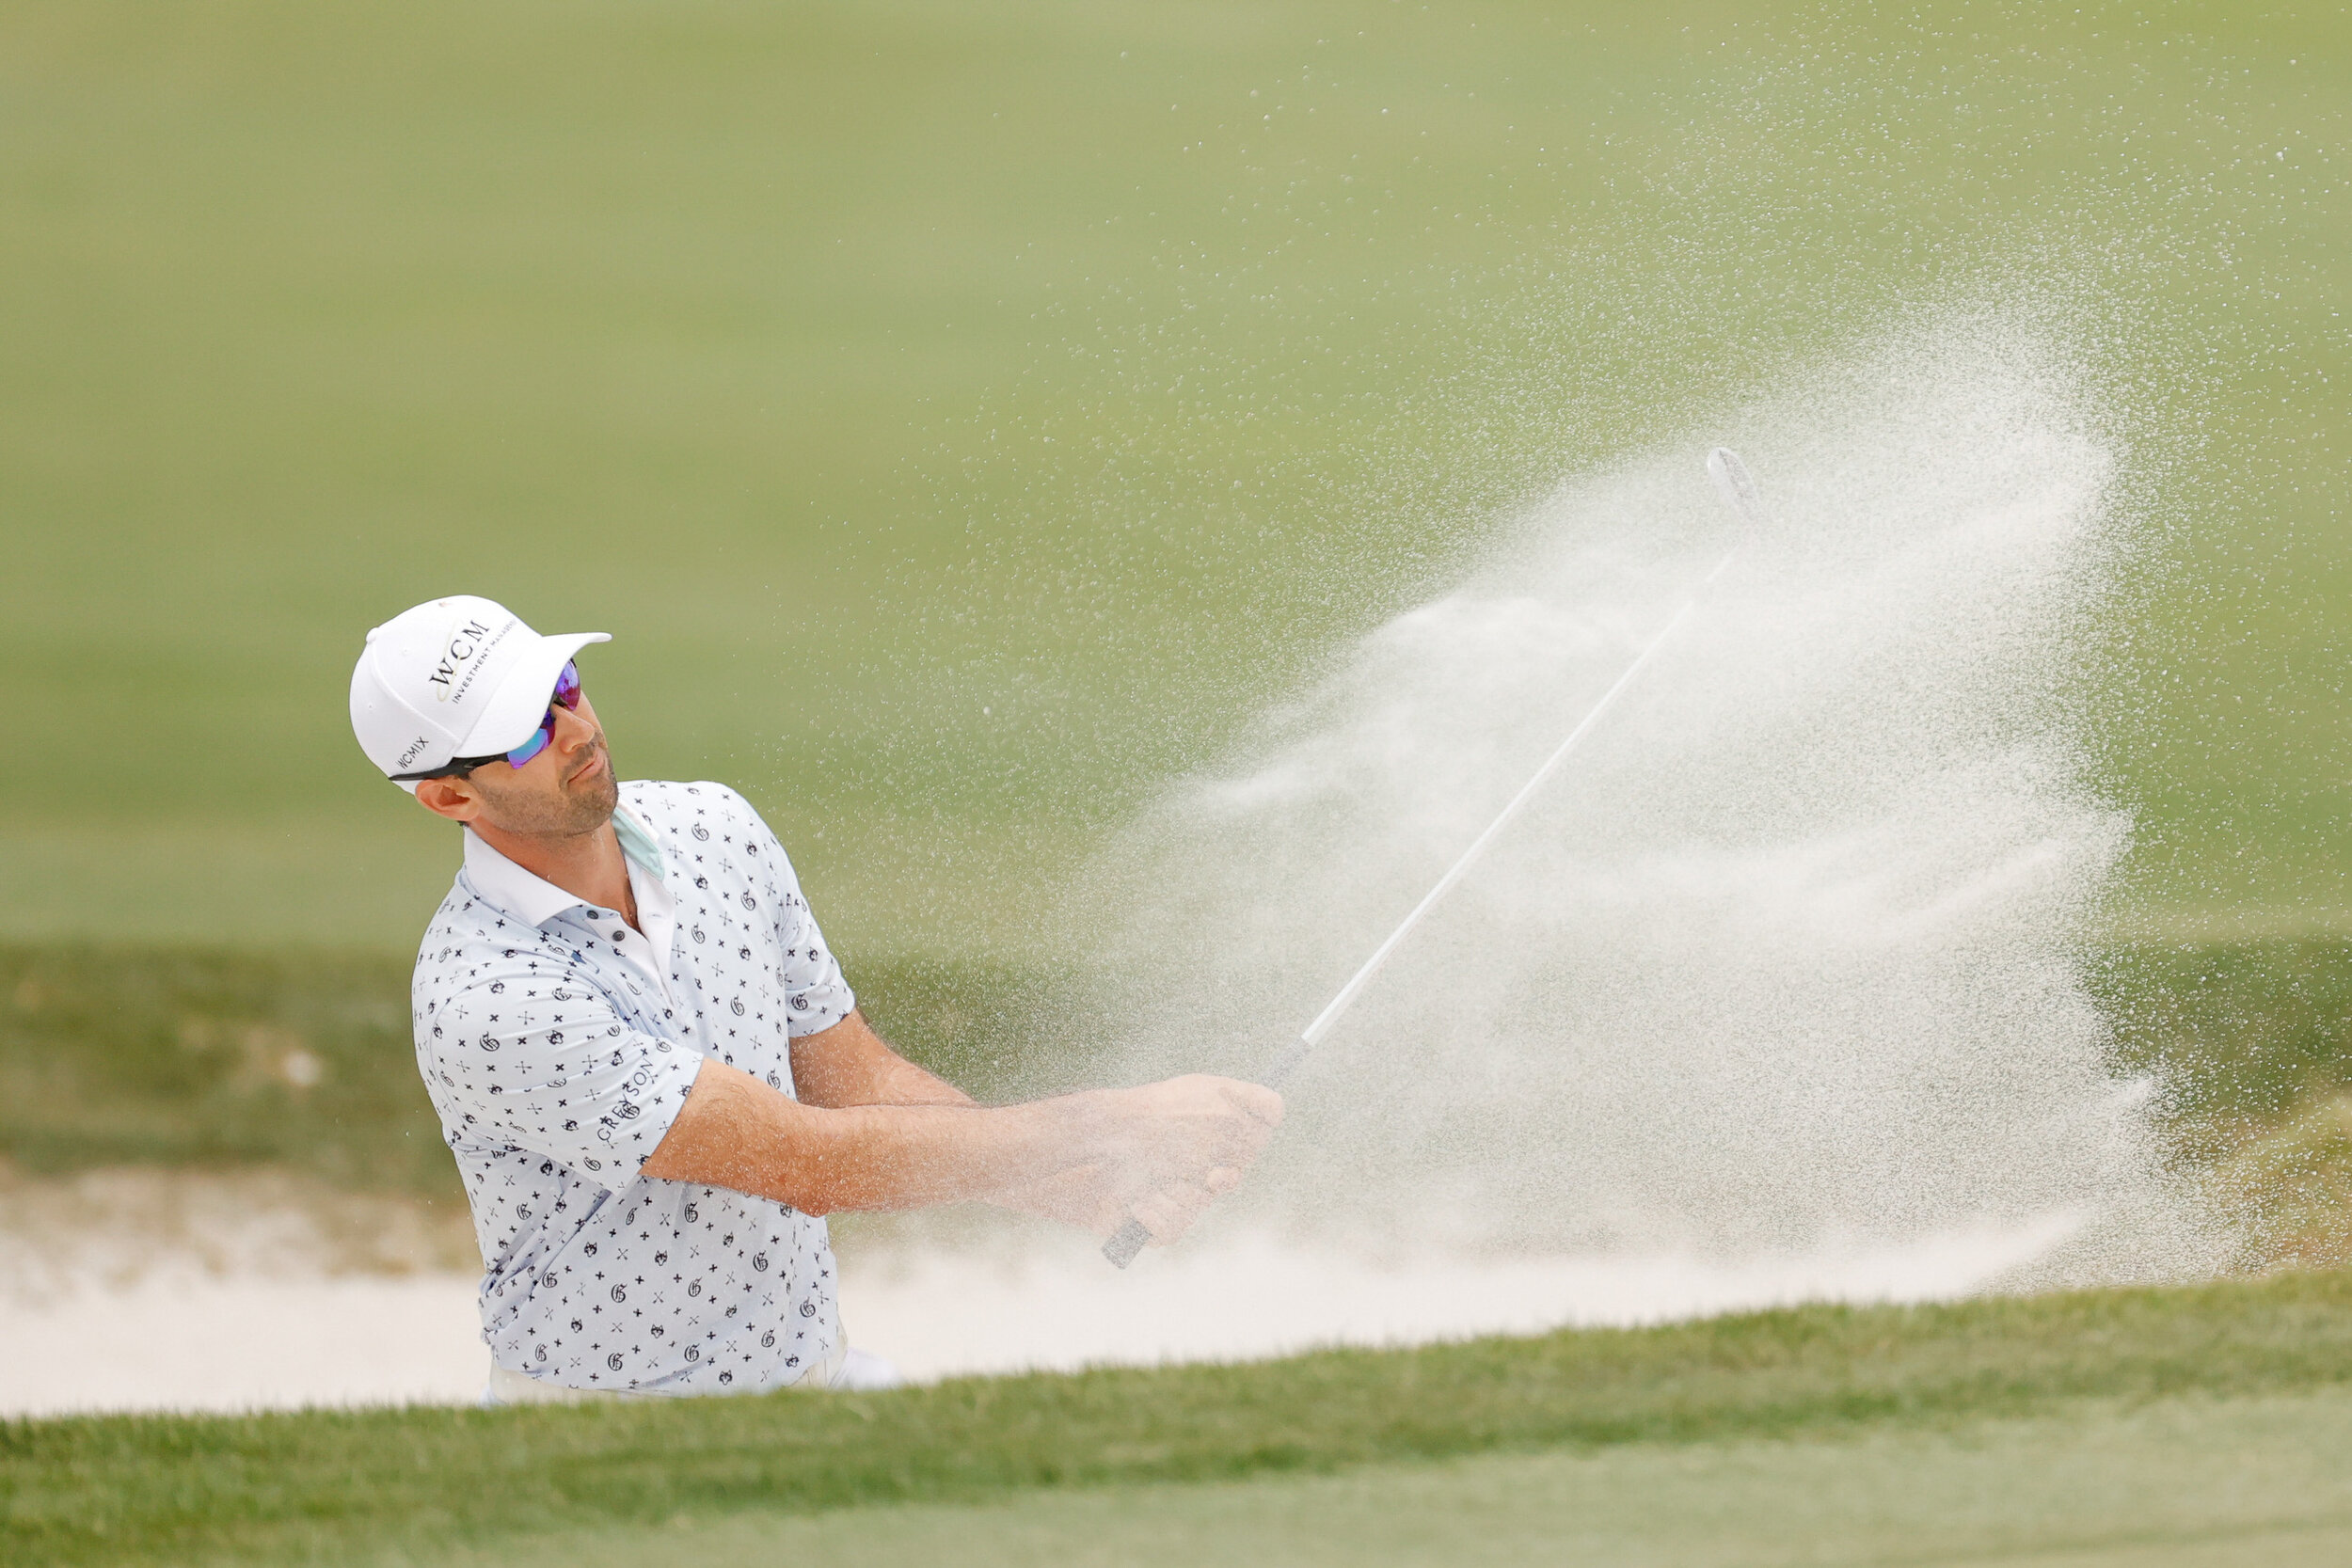  PALM BEACH GARDENS, FLORIDA - MARCH 20: Cameron Tringale of the United States plays a shot from a bunker on the third hole during the third round of The Honda Classic at PGA National Champion course on March 20, 2021 in Palm Beach Gardens, Florida. 